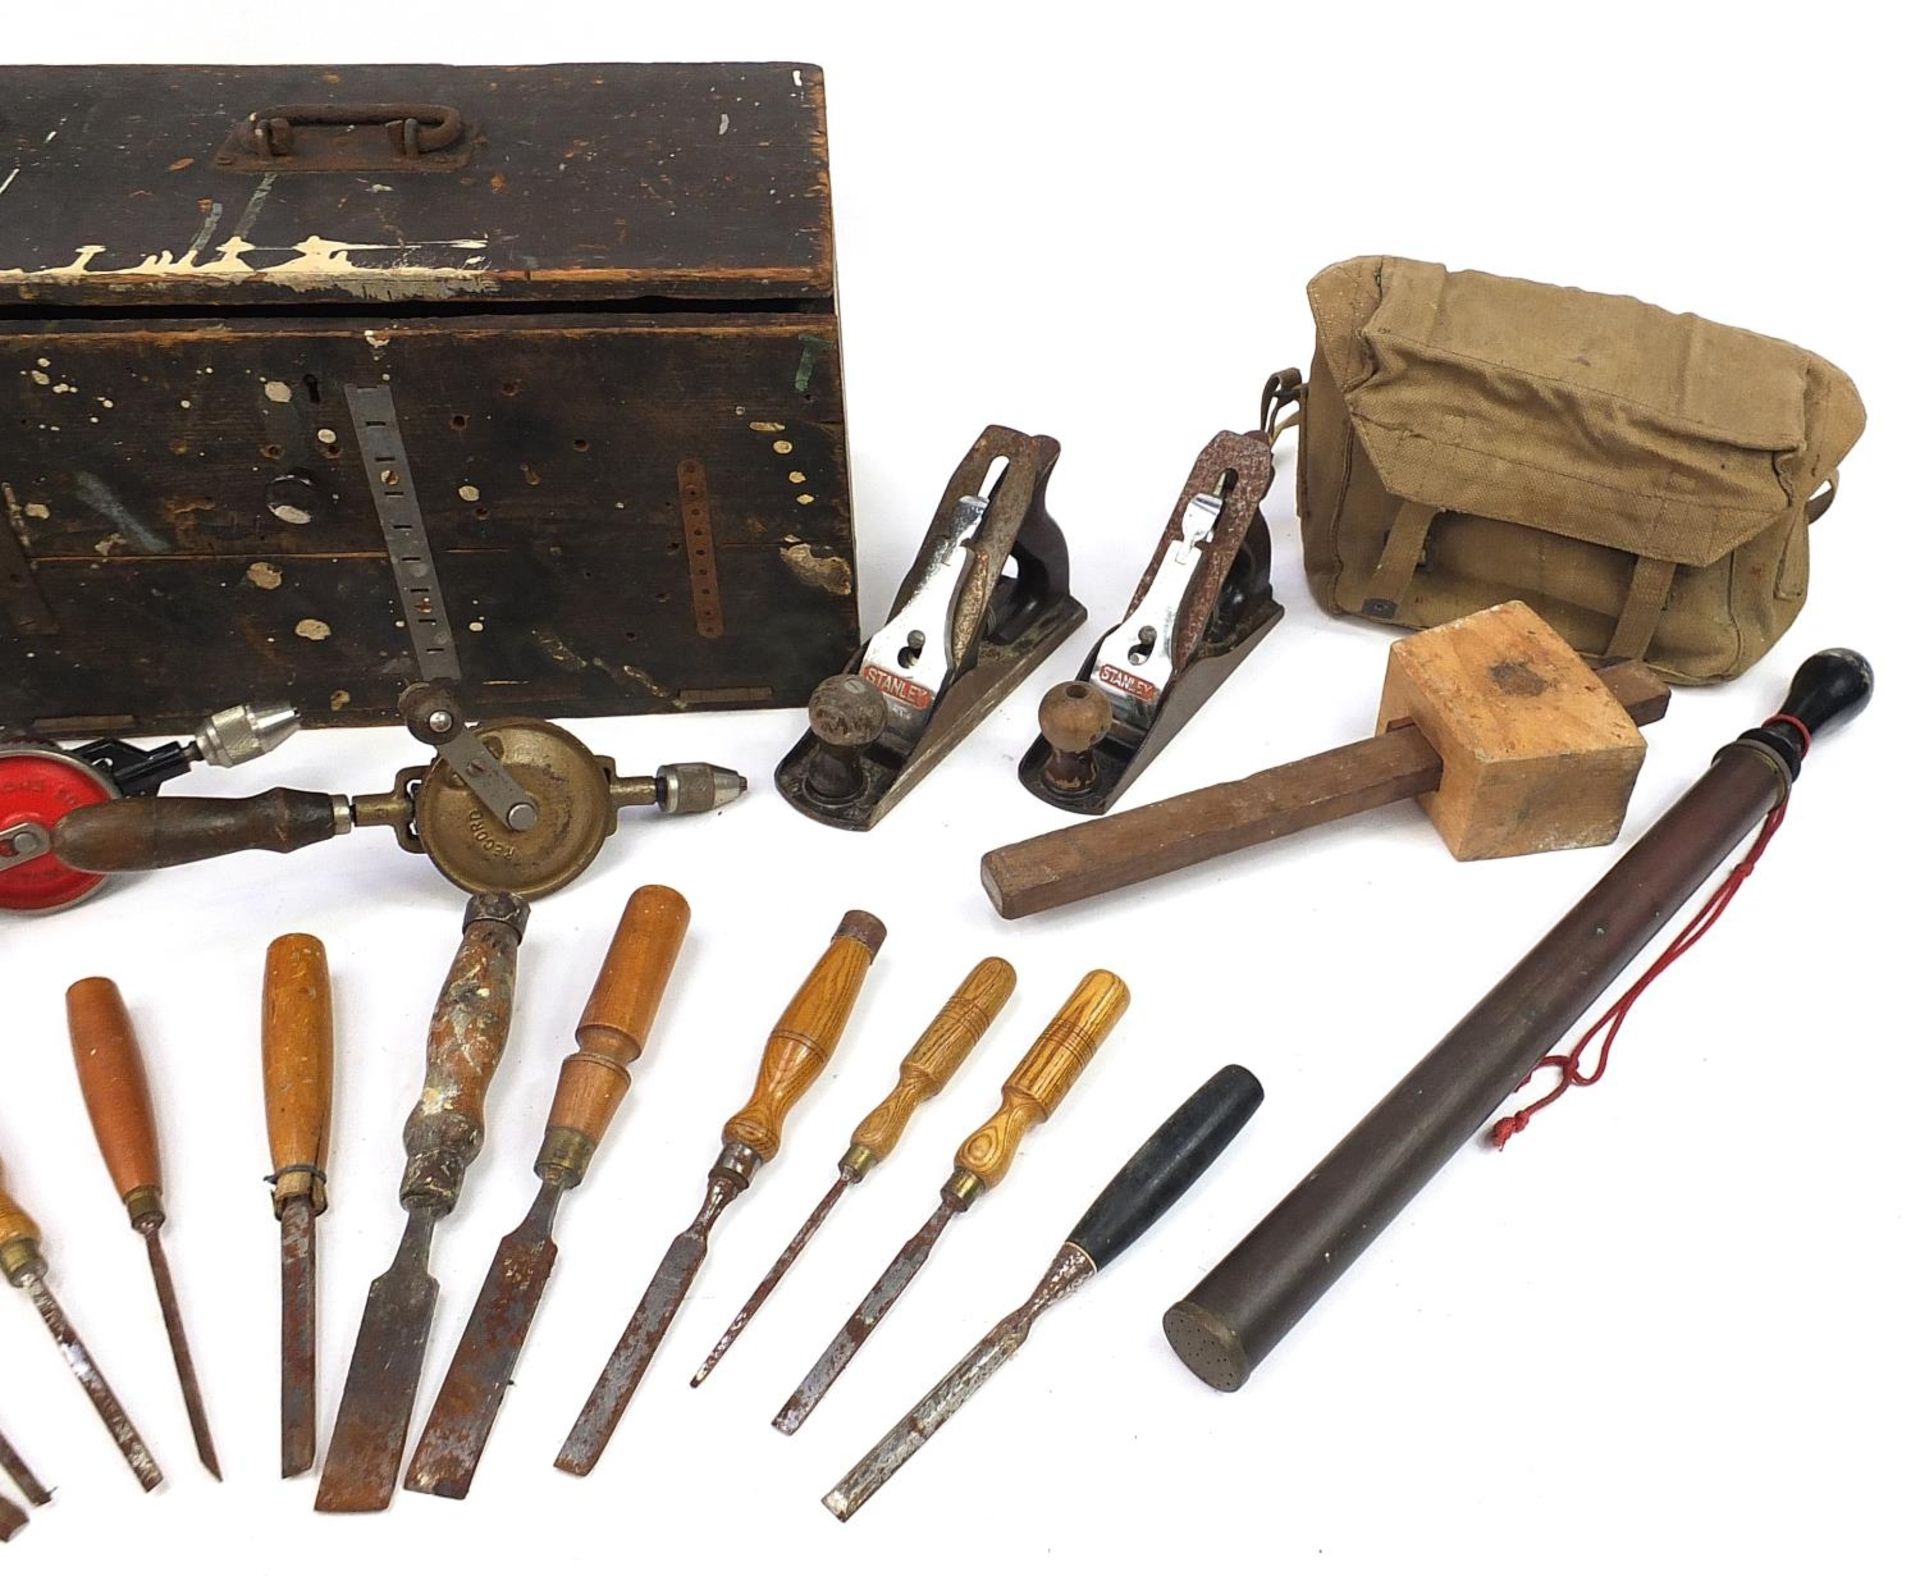 Vintage tools housed in a pine chest including chisels, wood planes and hand drills, the chest - Bild 3 aus 3